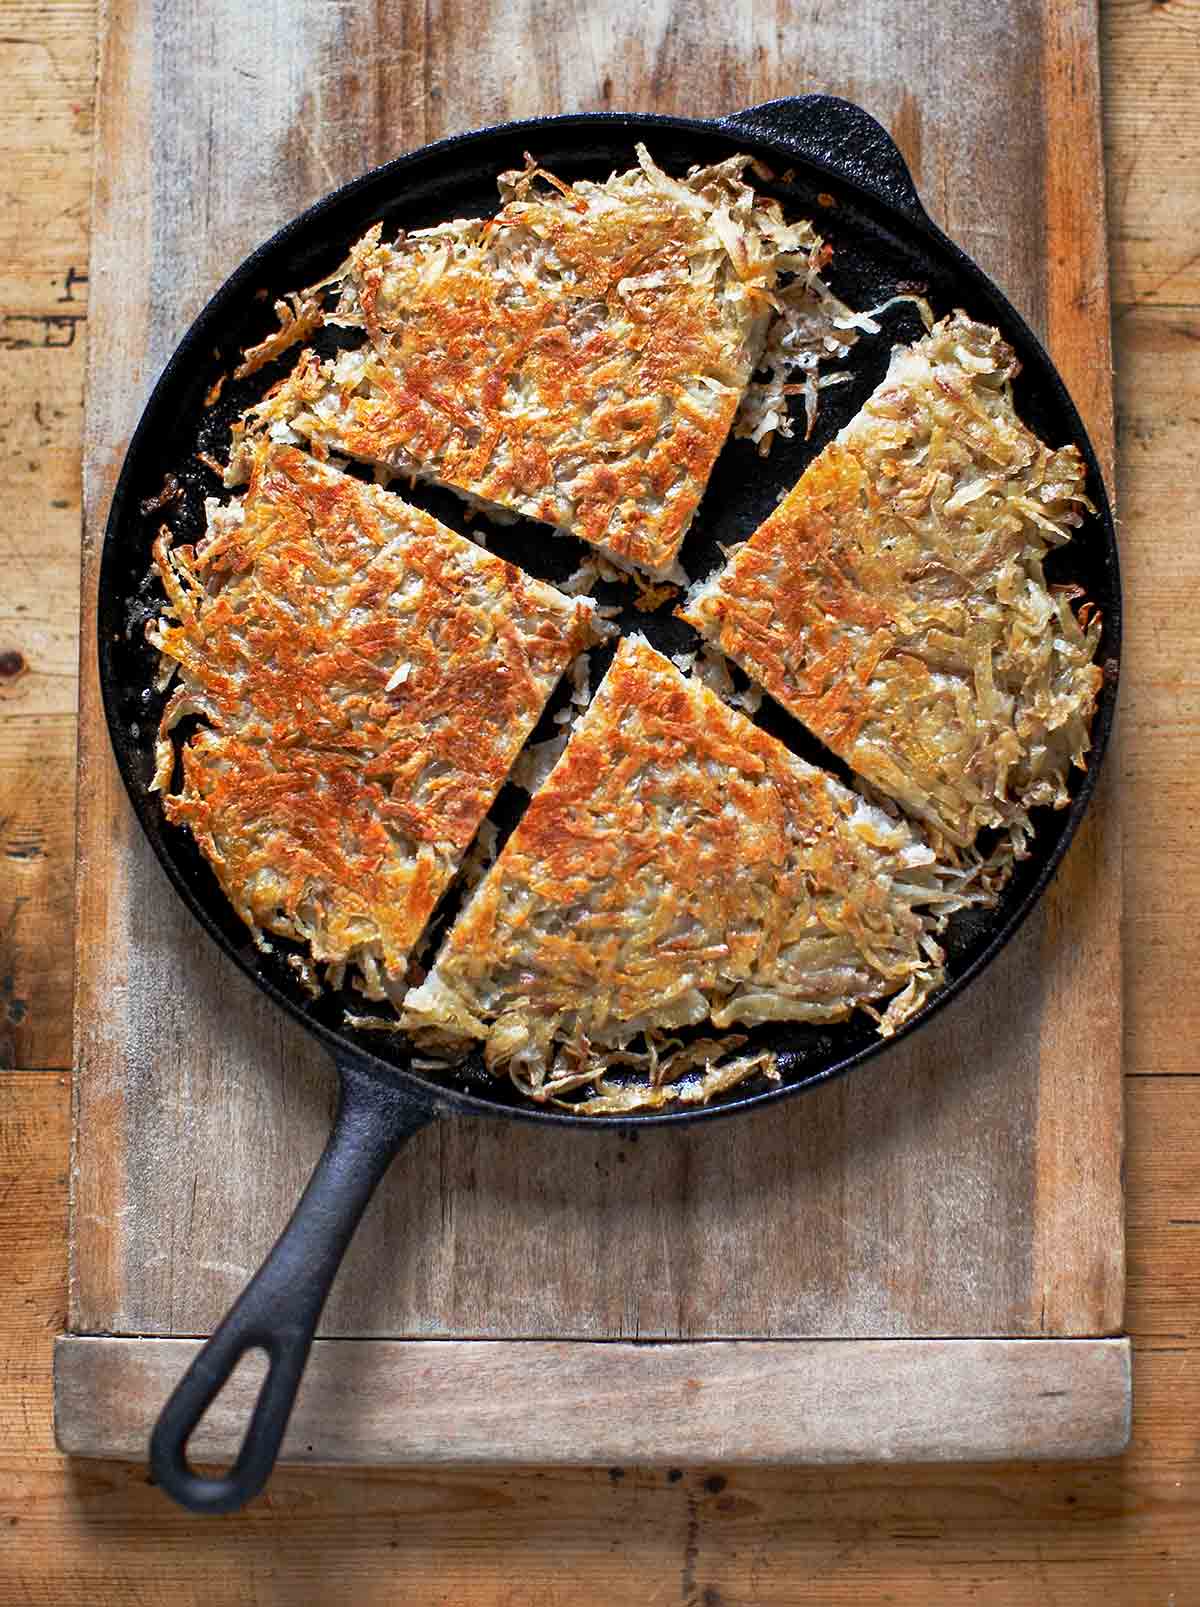 Cast iron skillet with a pan boxty (Irish potato pancakes) in it, on a wooden cutting board